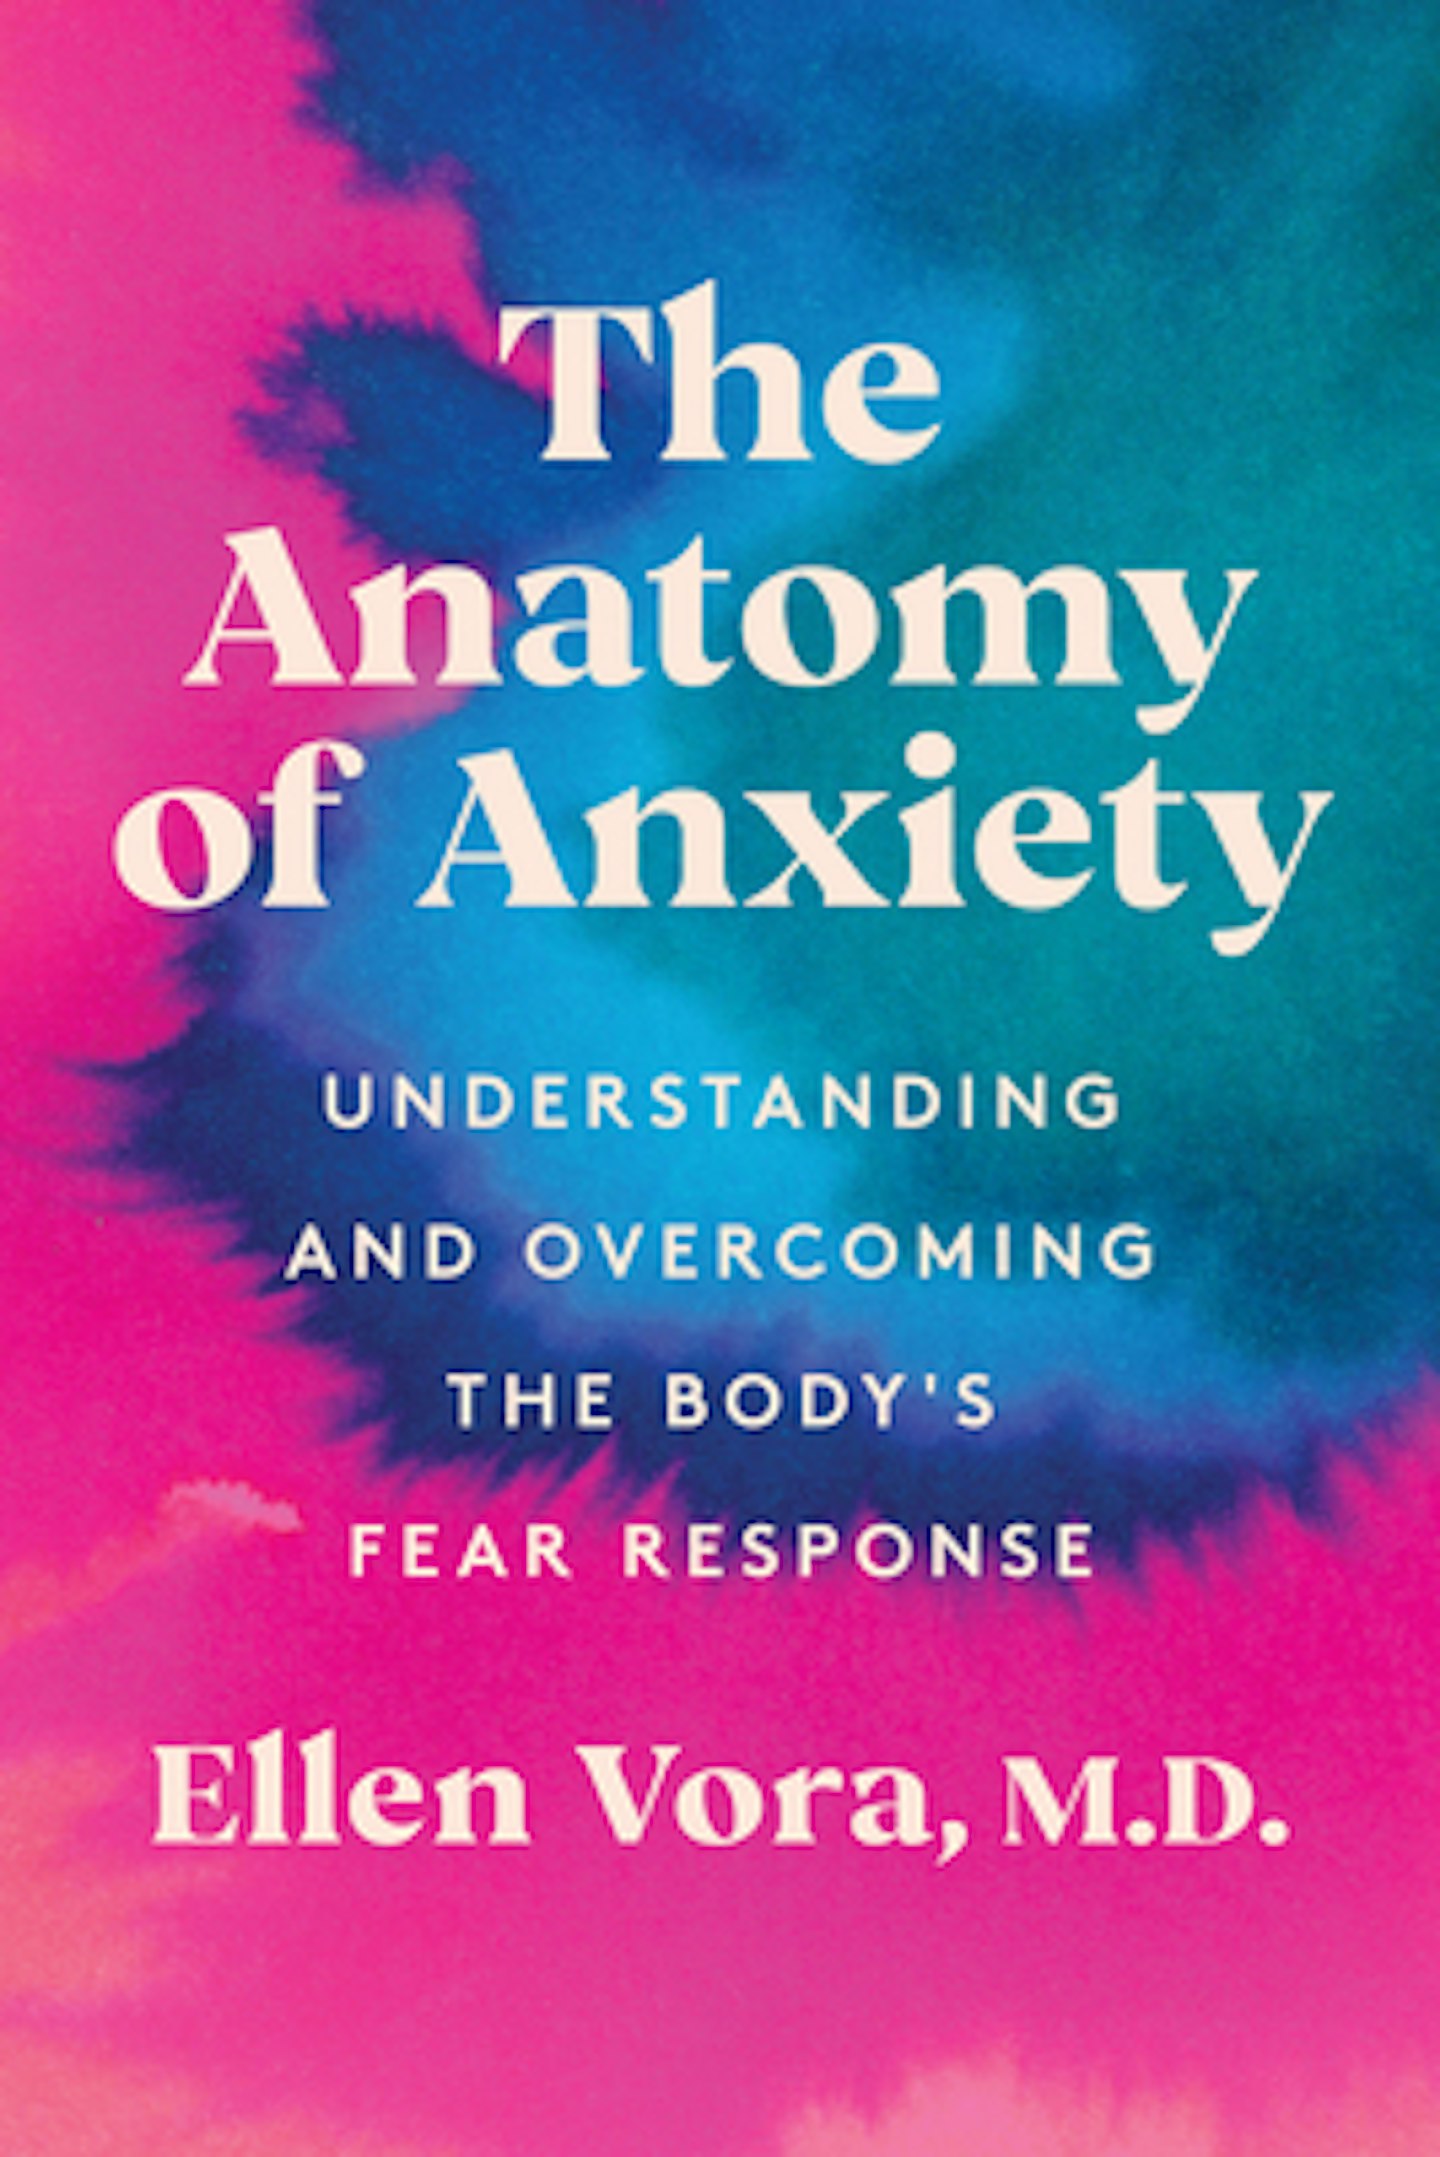 best self help books The Anatomy Of Anxiety